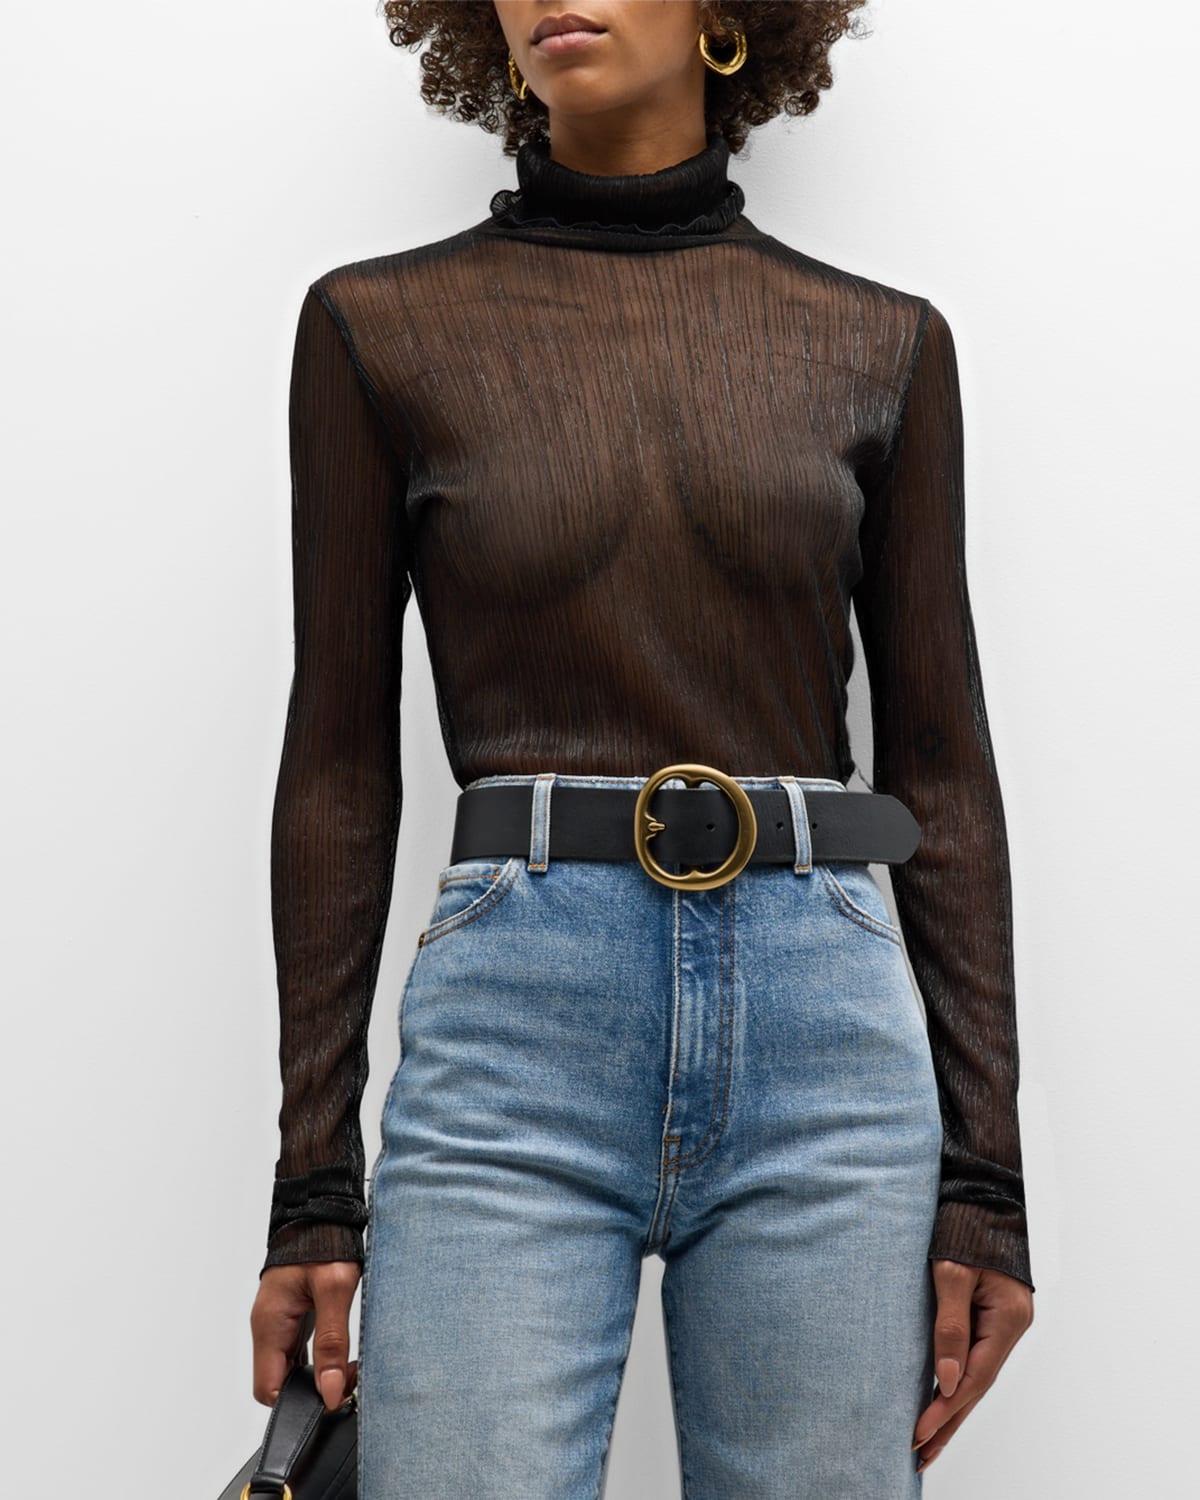 RECTO SPARKLY SHEER PLEATED TURTLENECK TOP